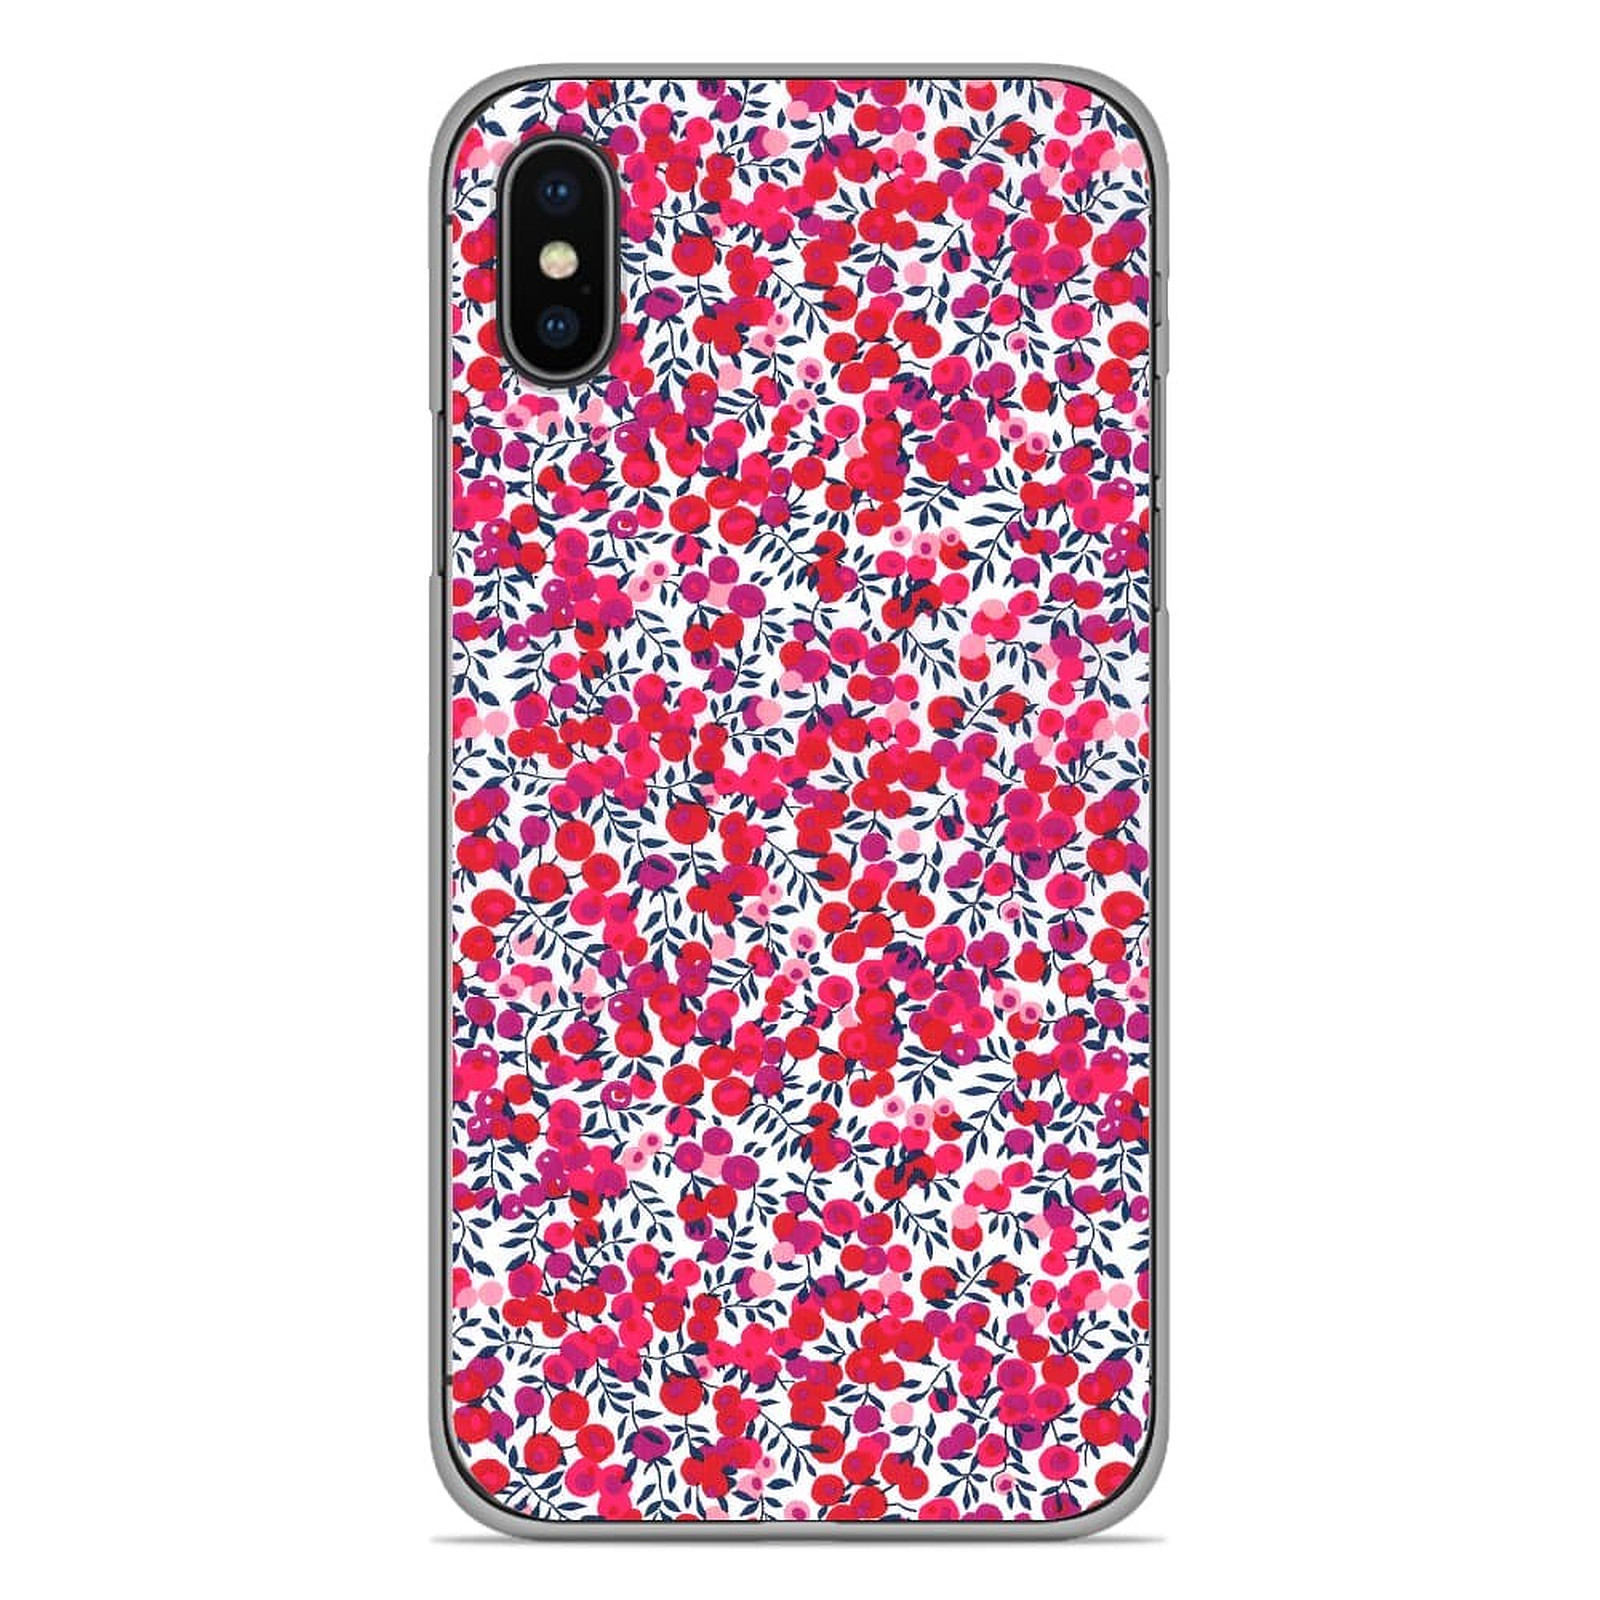 1001 Coques Coque silicone gel Apple iPhone XS Max motif Liberty Wiltshire Rouge - Coque telephone 1001Coques